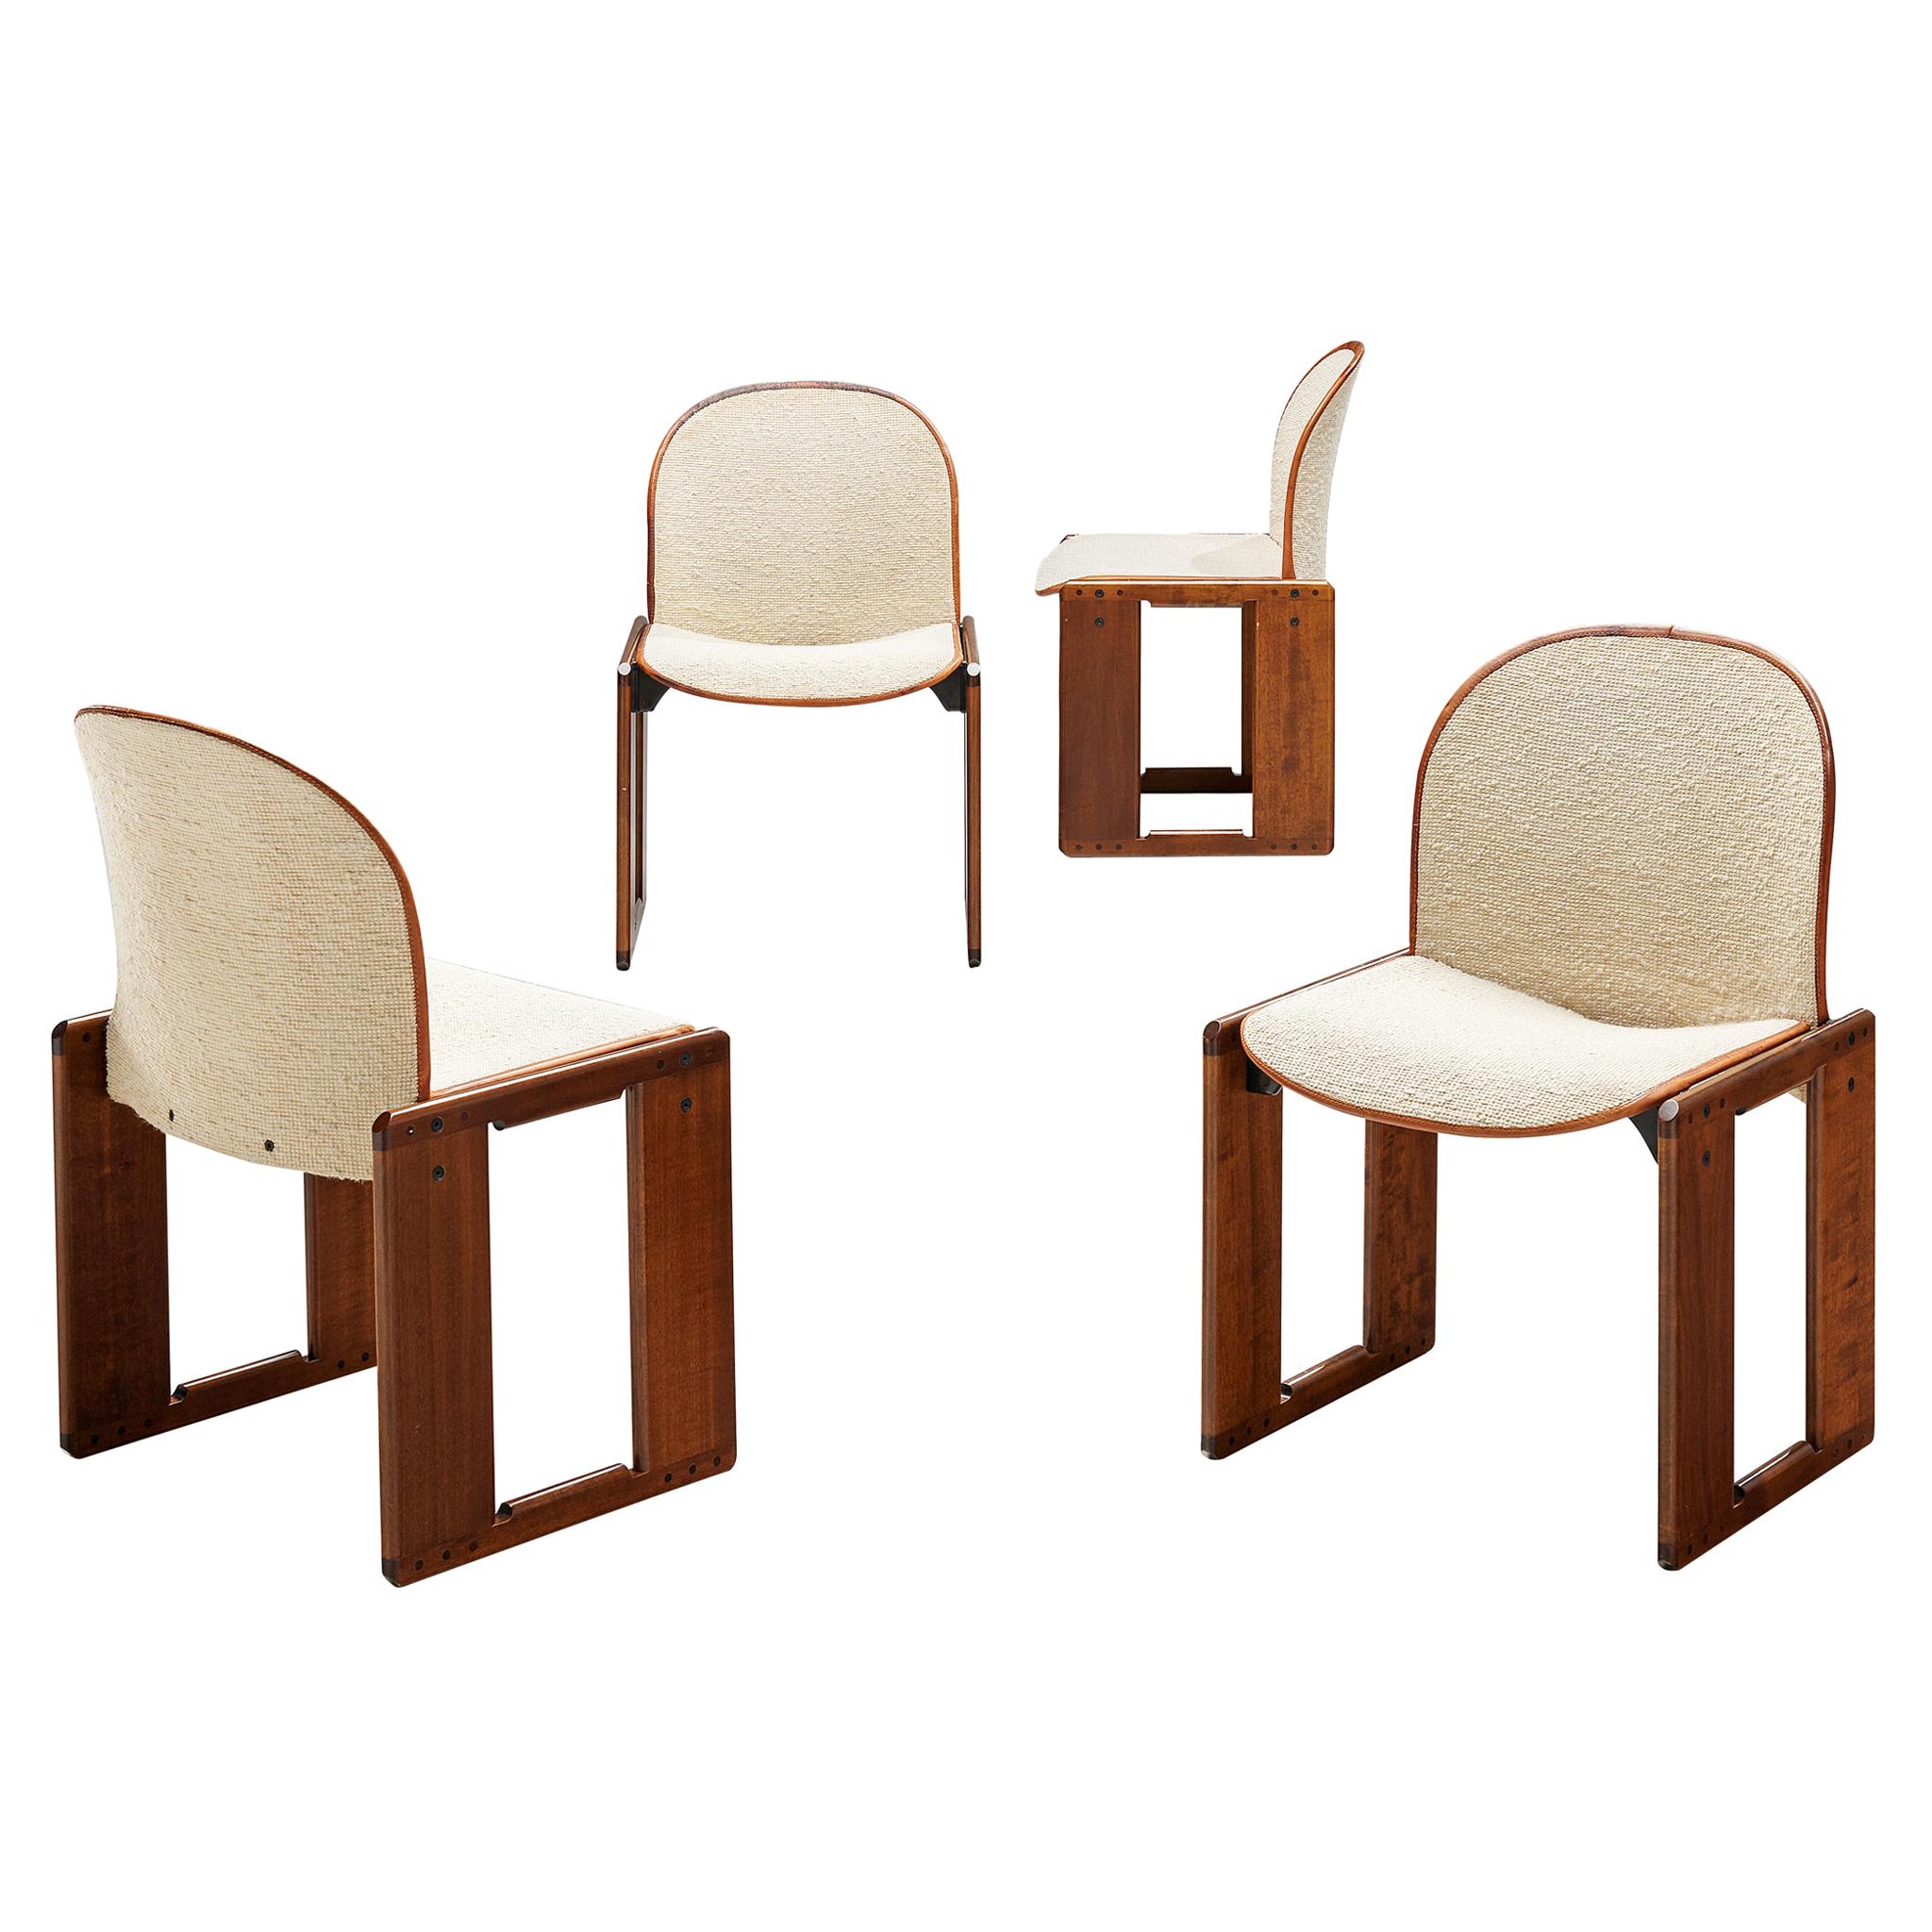 Set of Four 'Dialogo' Chairs in Ivory Upholstery by Afra & Tobia Scarpa